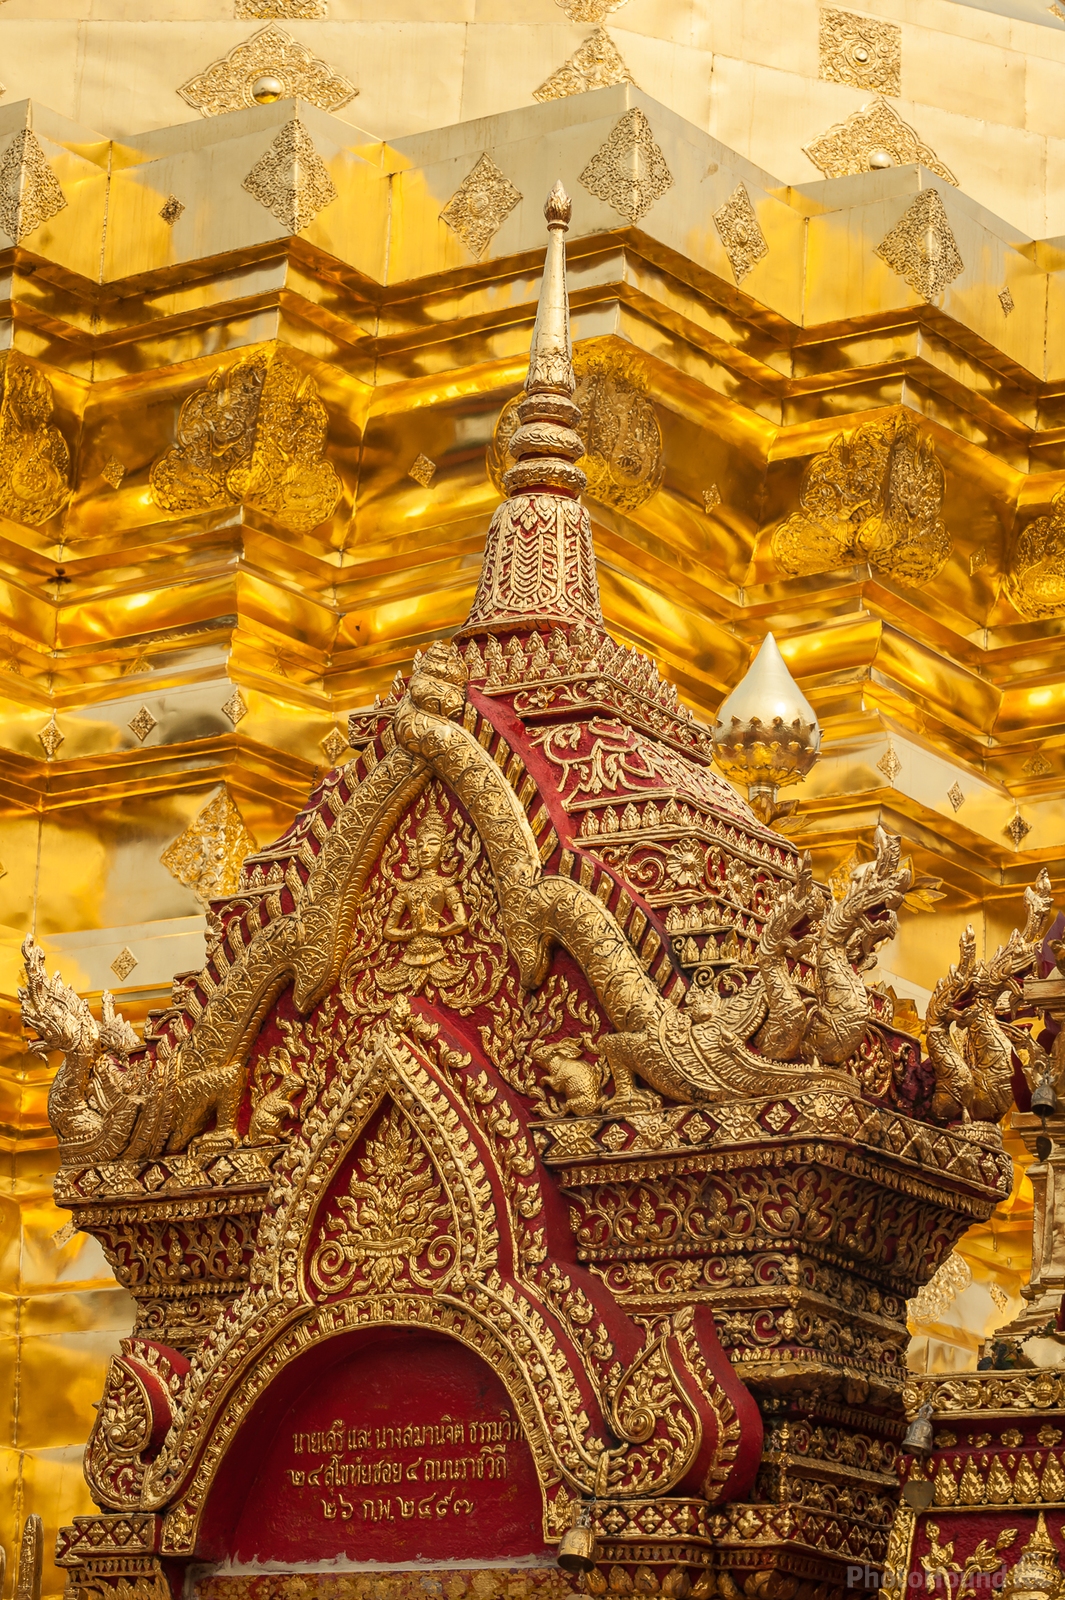 Image of Wat Phra That Doi Suthep by Sue Wolfe